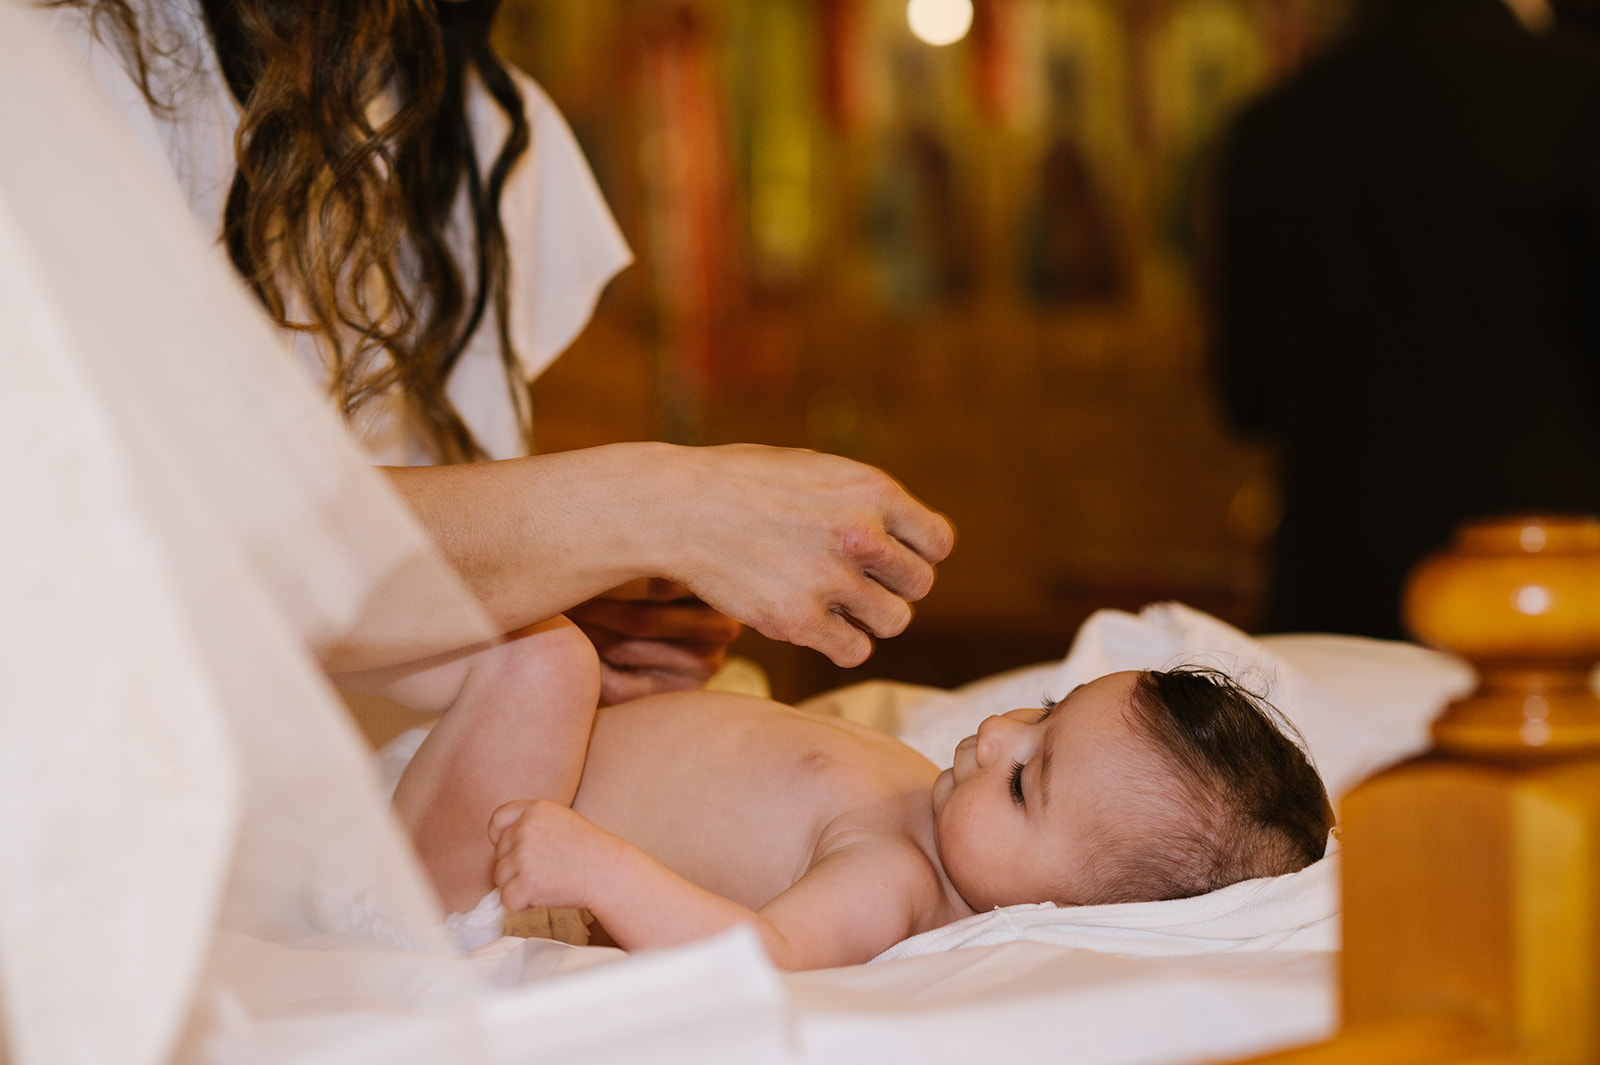 dressing the baby for her greek orthodox christening